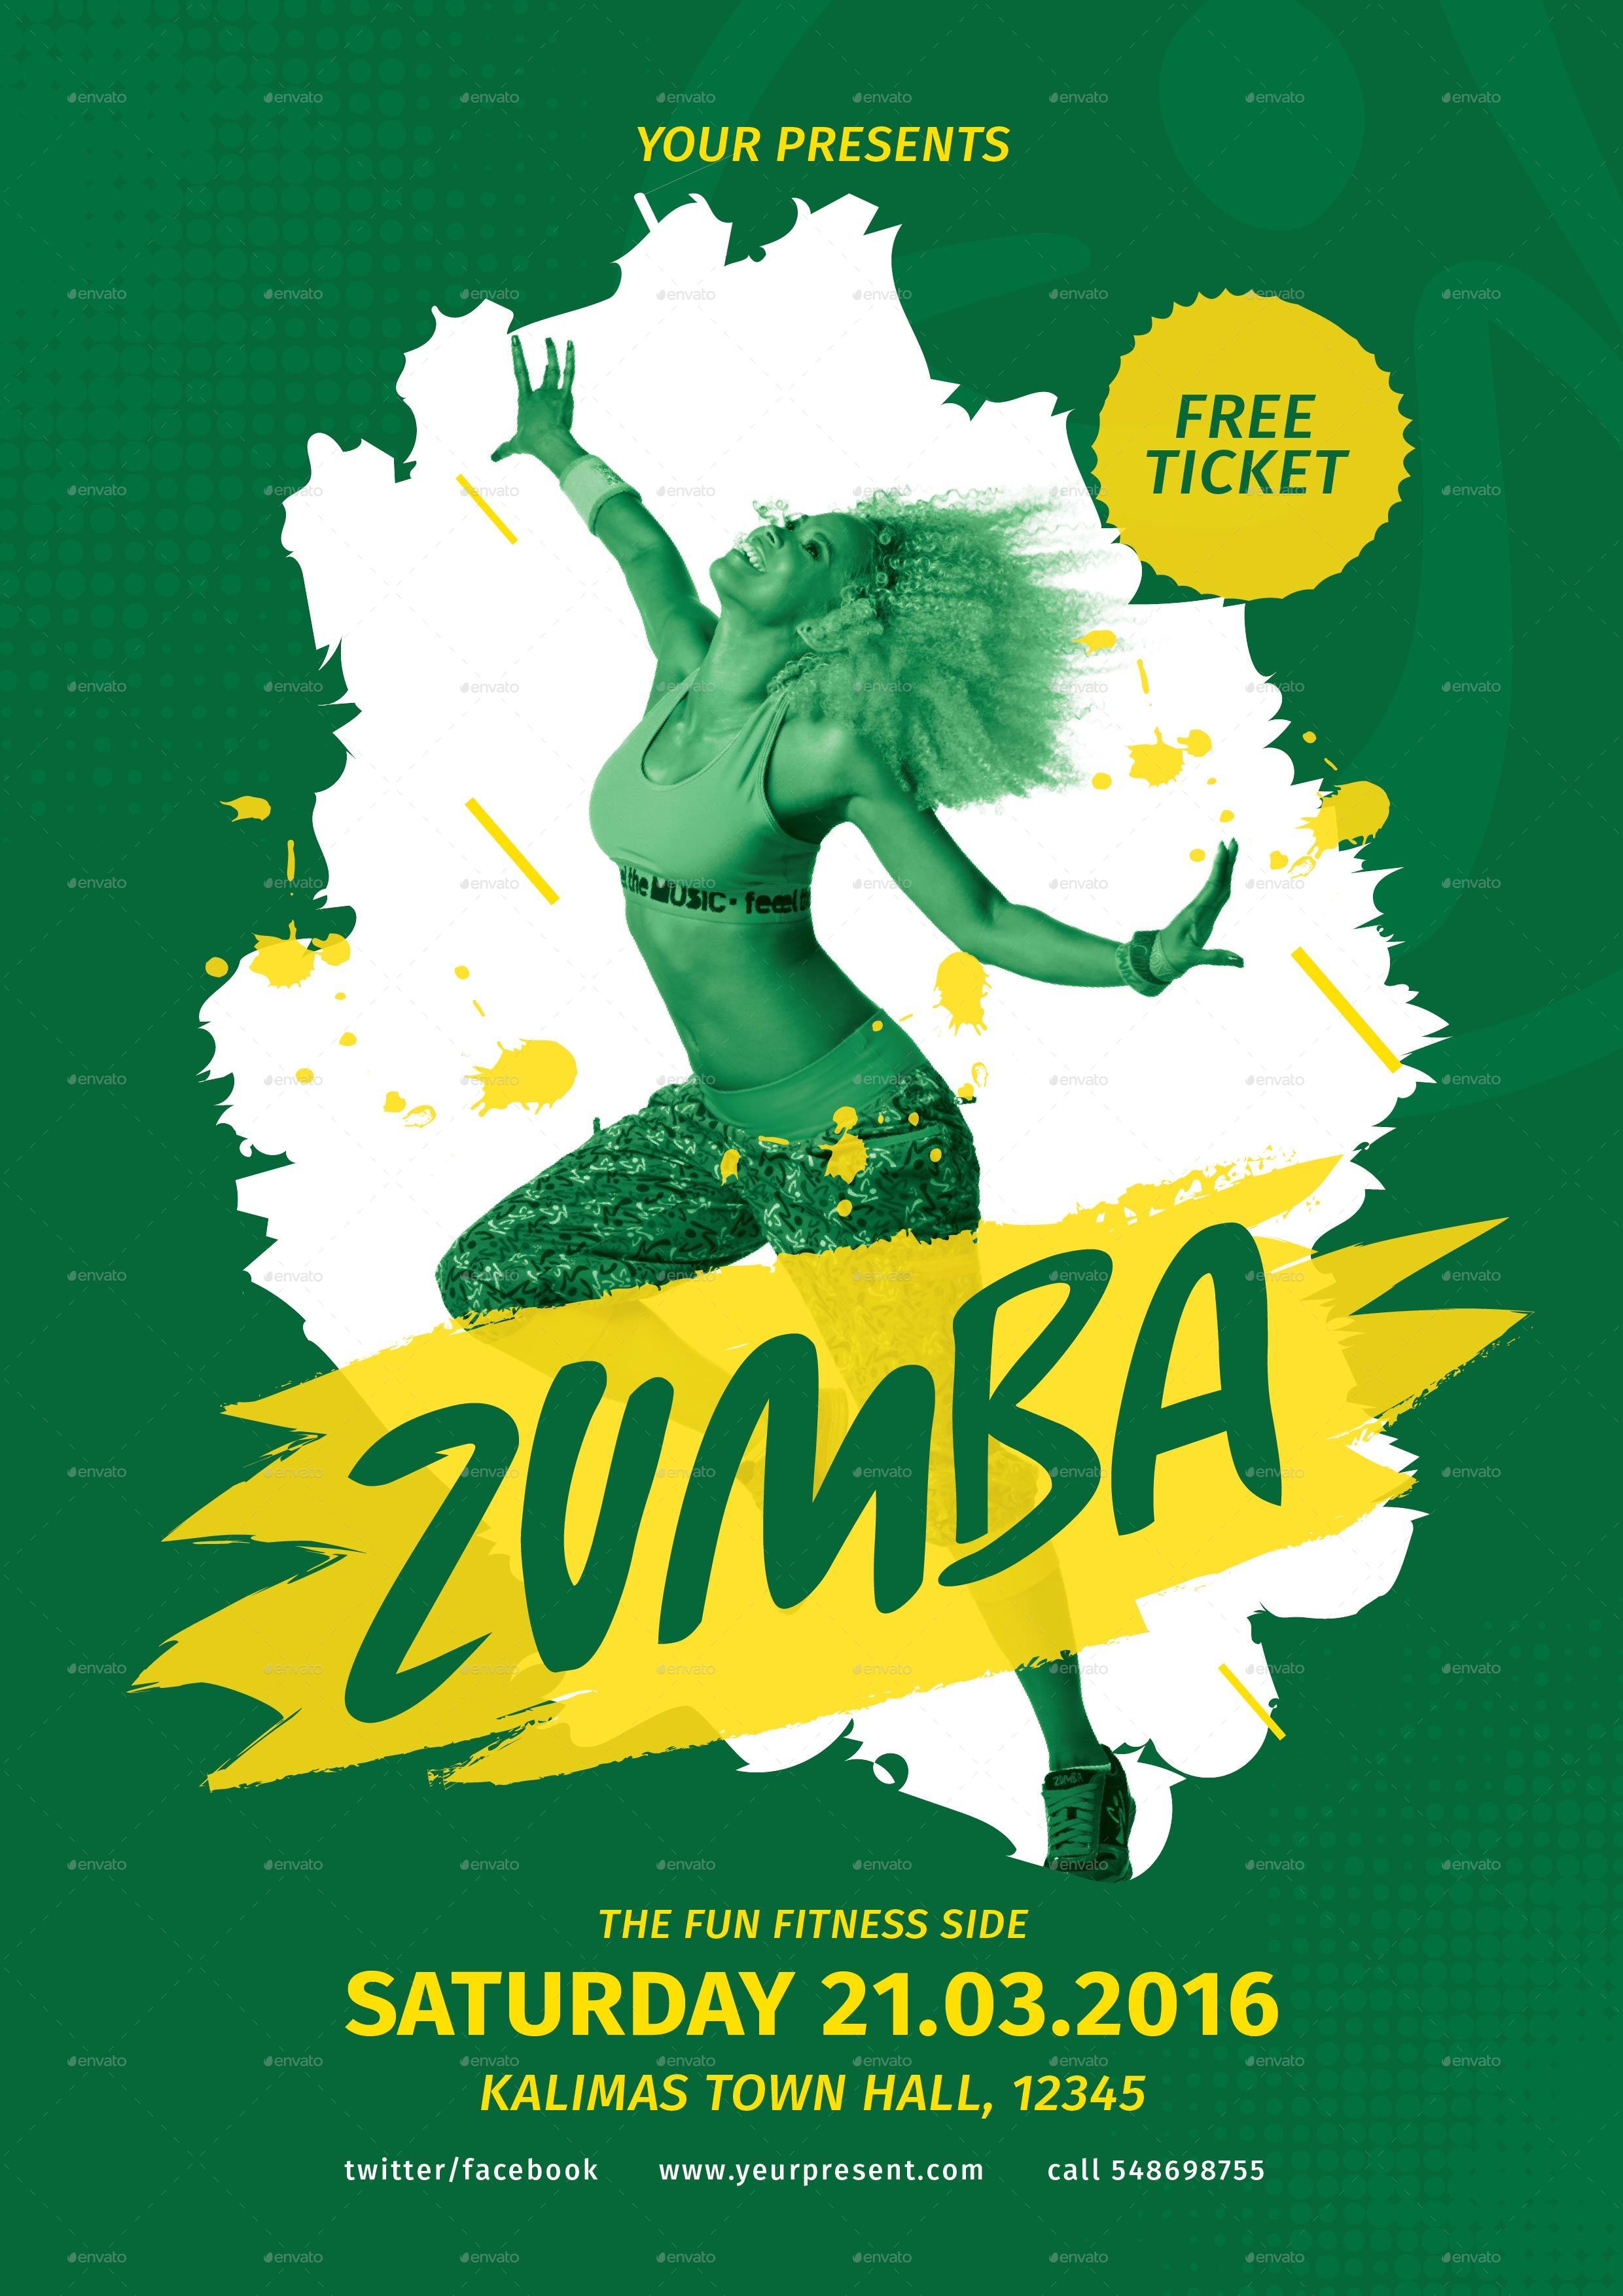 Zumba Party Flyer by lilynthesweetpea  GraphicRiver With Regard To Zumba Flyer Template Free